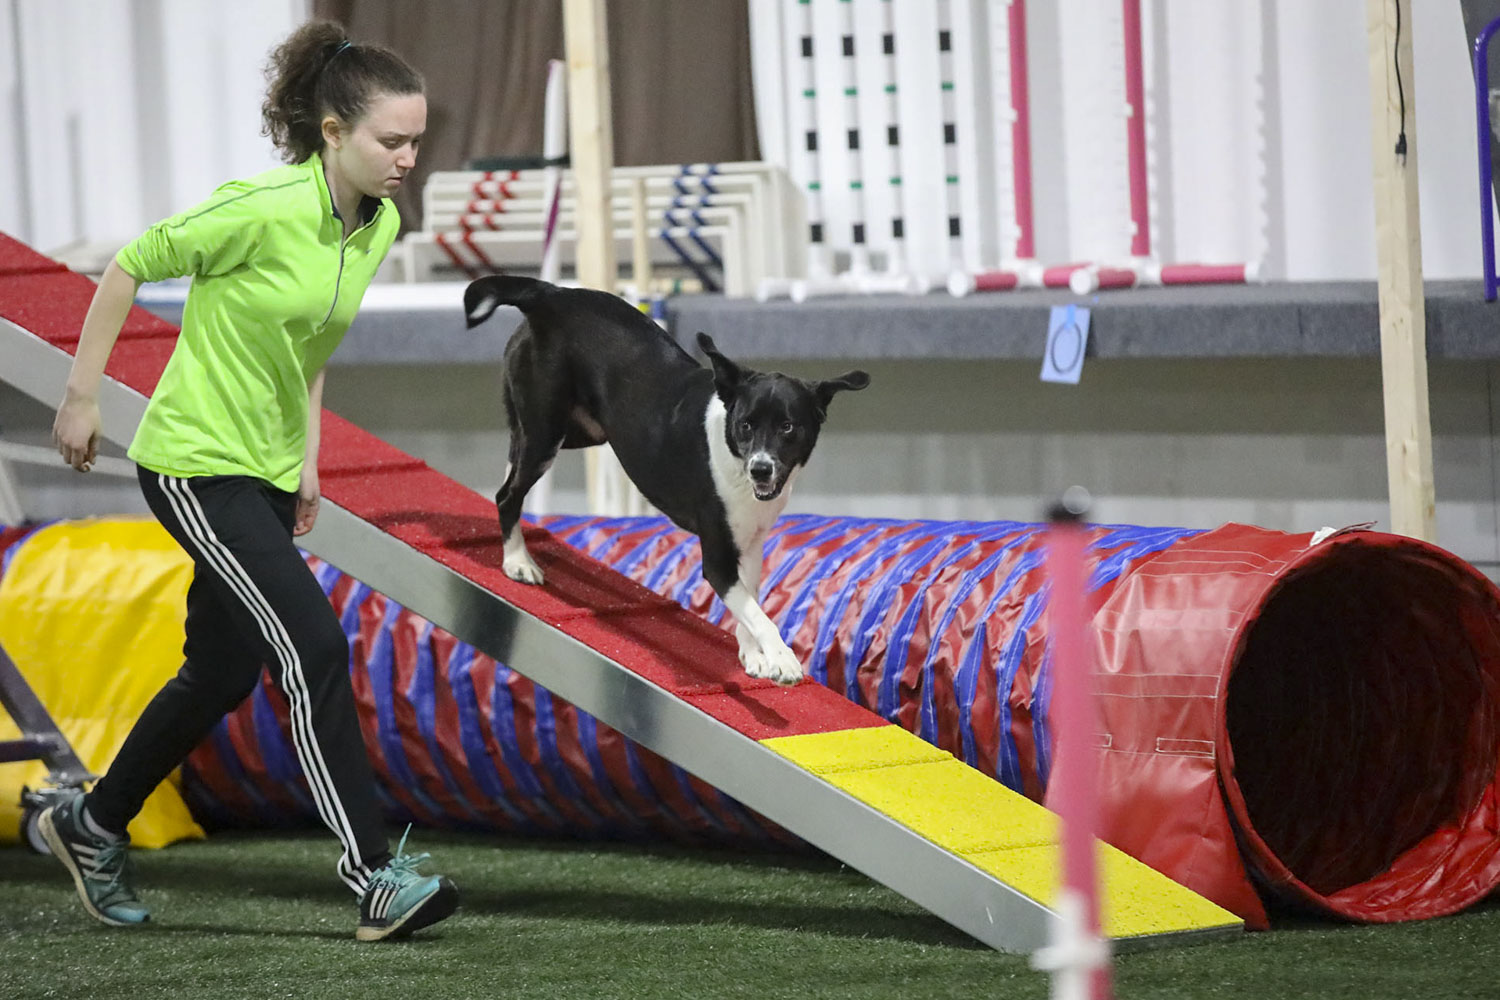 Riley running down a ramp with Kira Baugh running next to her